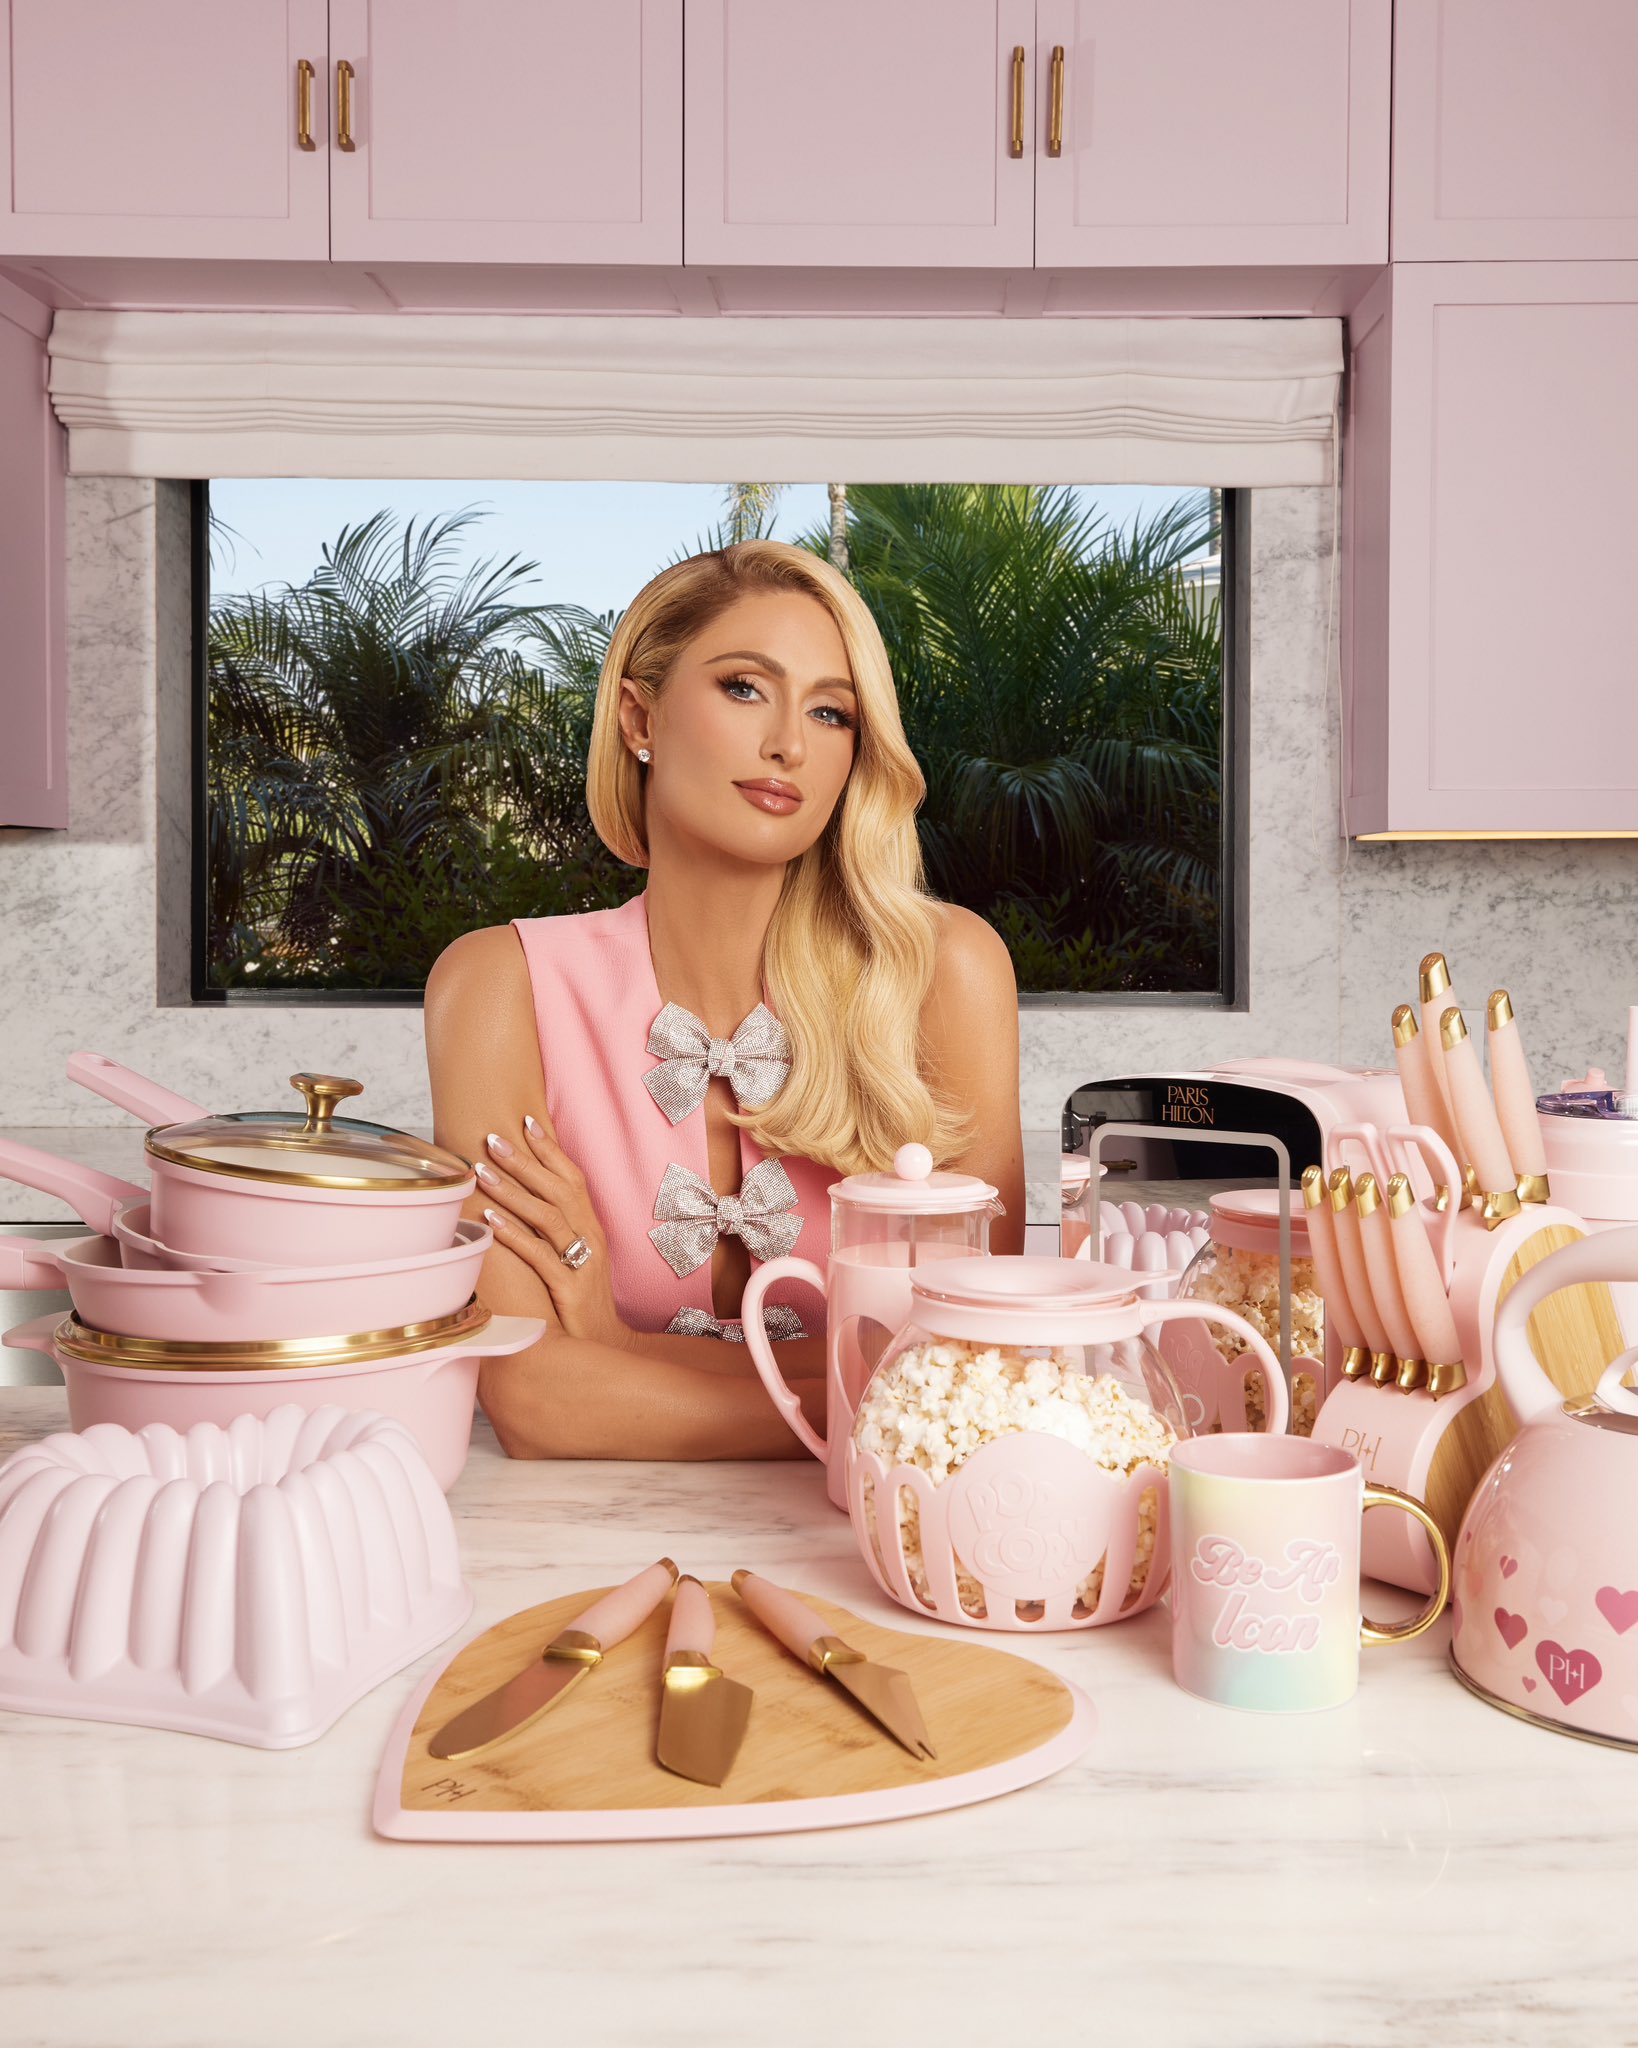 ParisHilton on X: It's finally here! My new cookware line is out